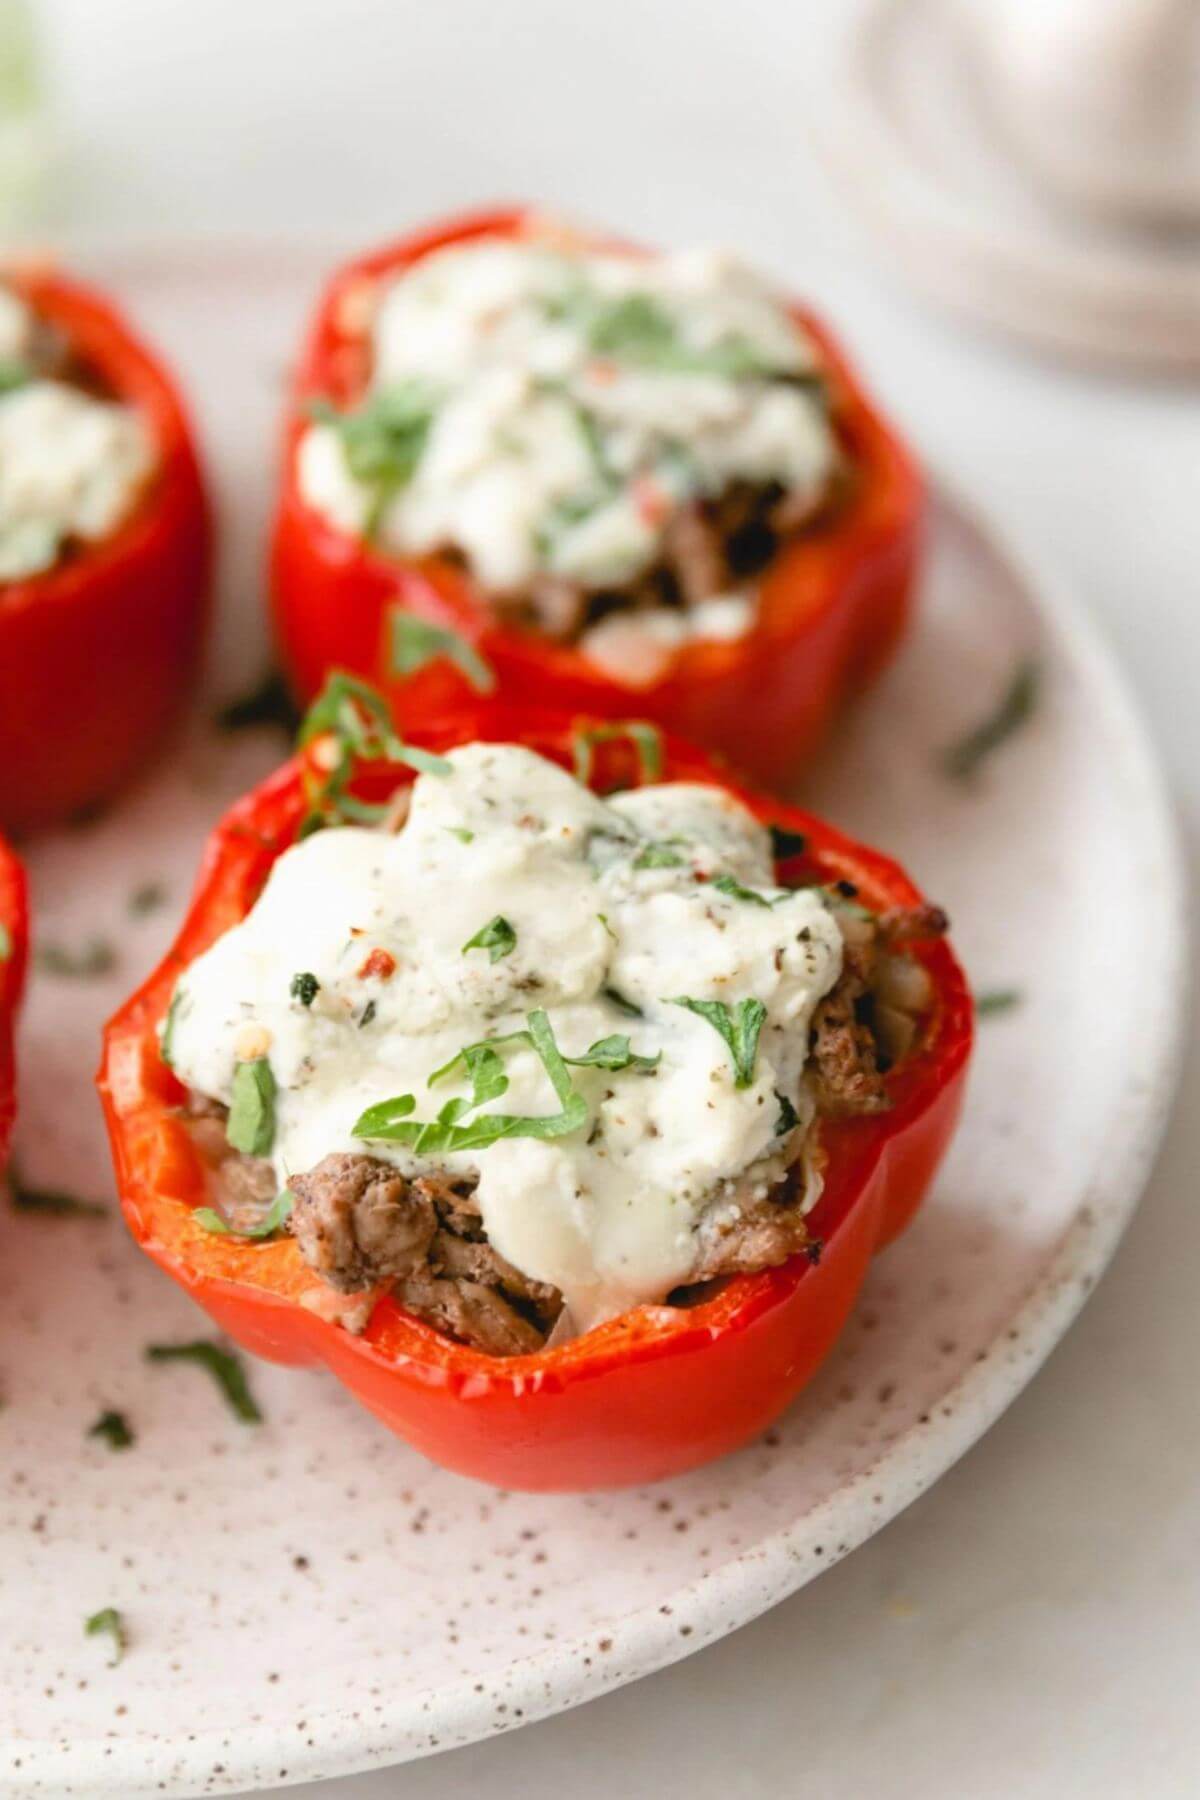 Ricotta and shaved steak stuffed peppers.